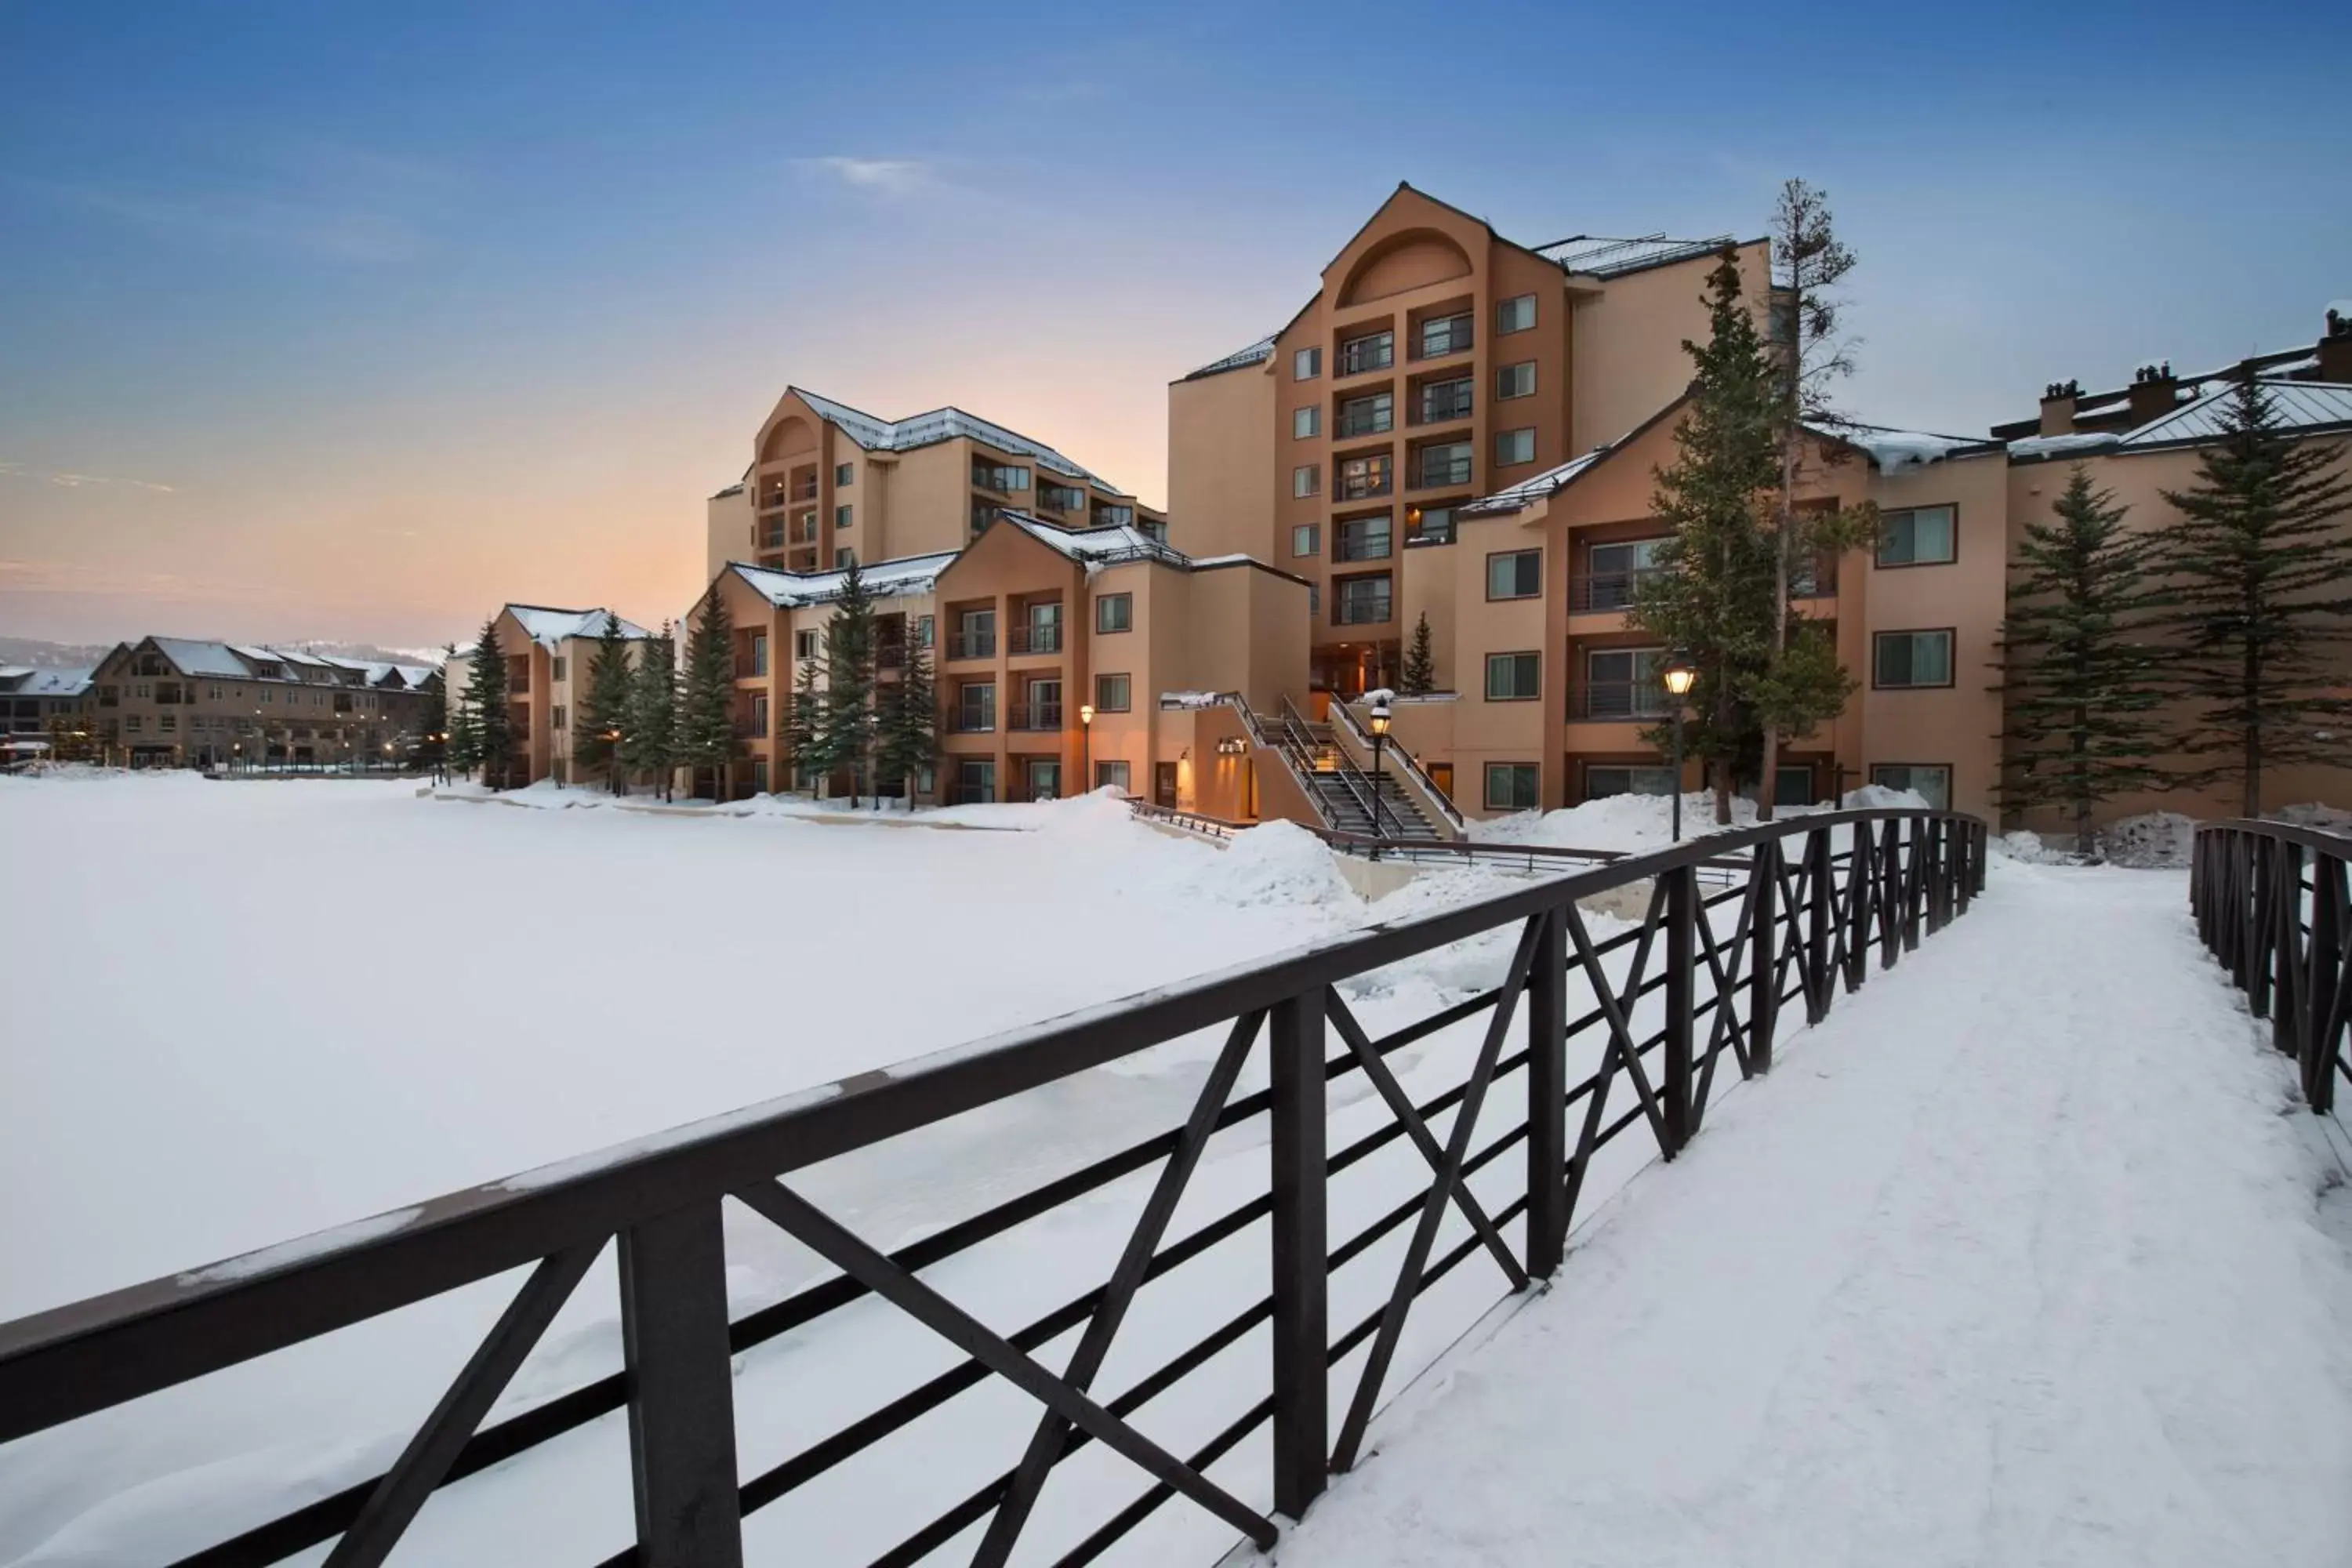 Property building, Winter in Marriott's Mountain Valley Lodge at Breckenridge